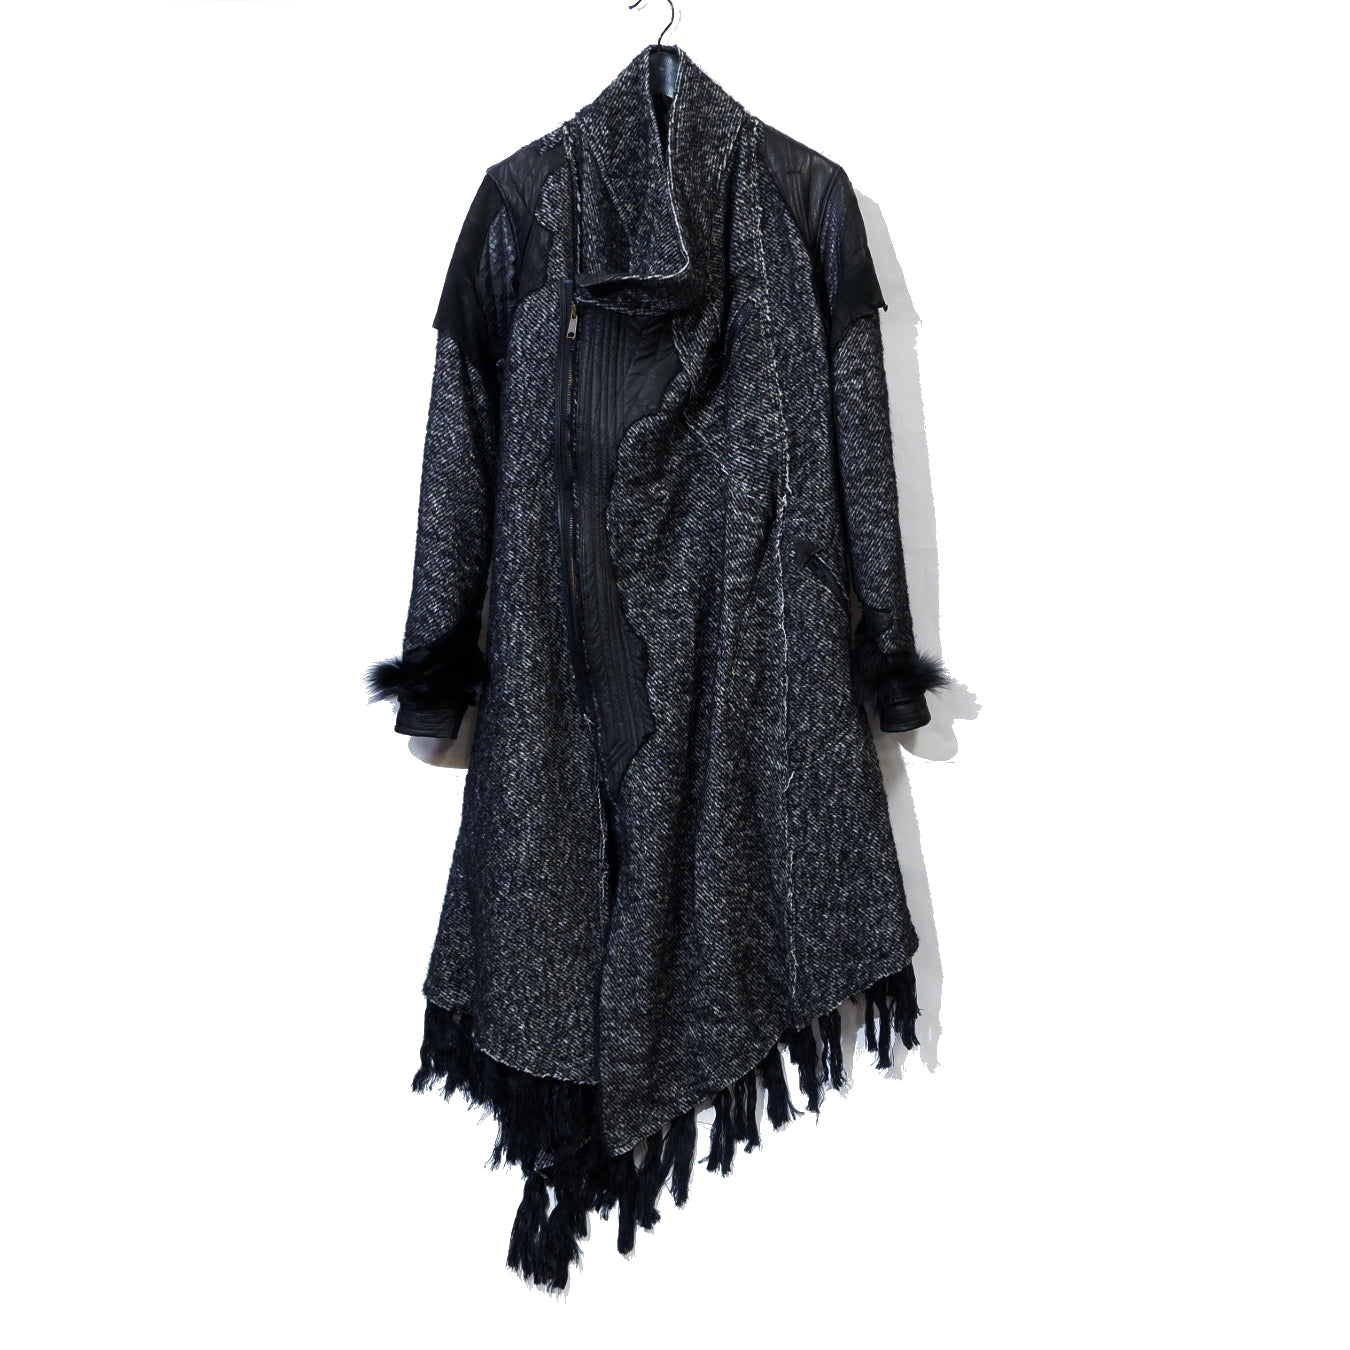 Tweed Leather Changing Wrap Coat / GRAY